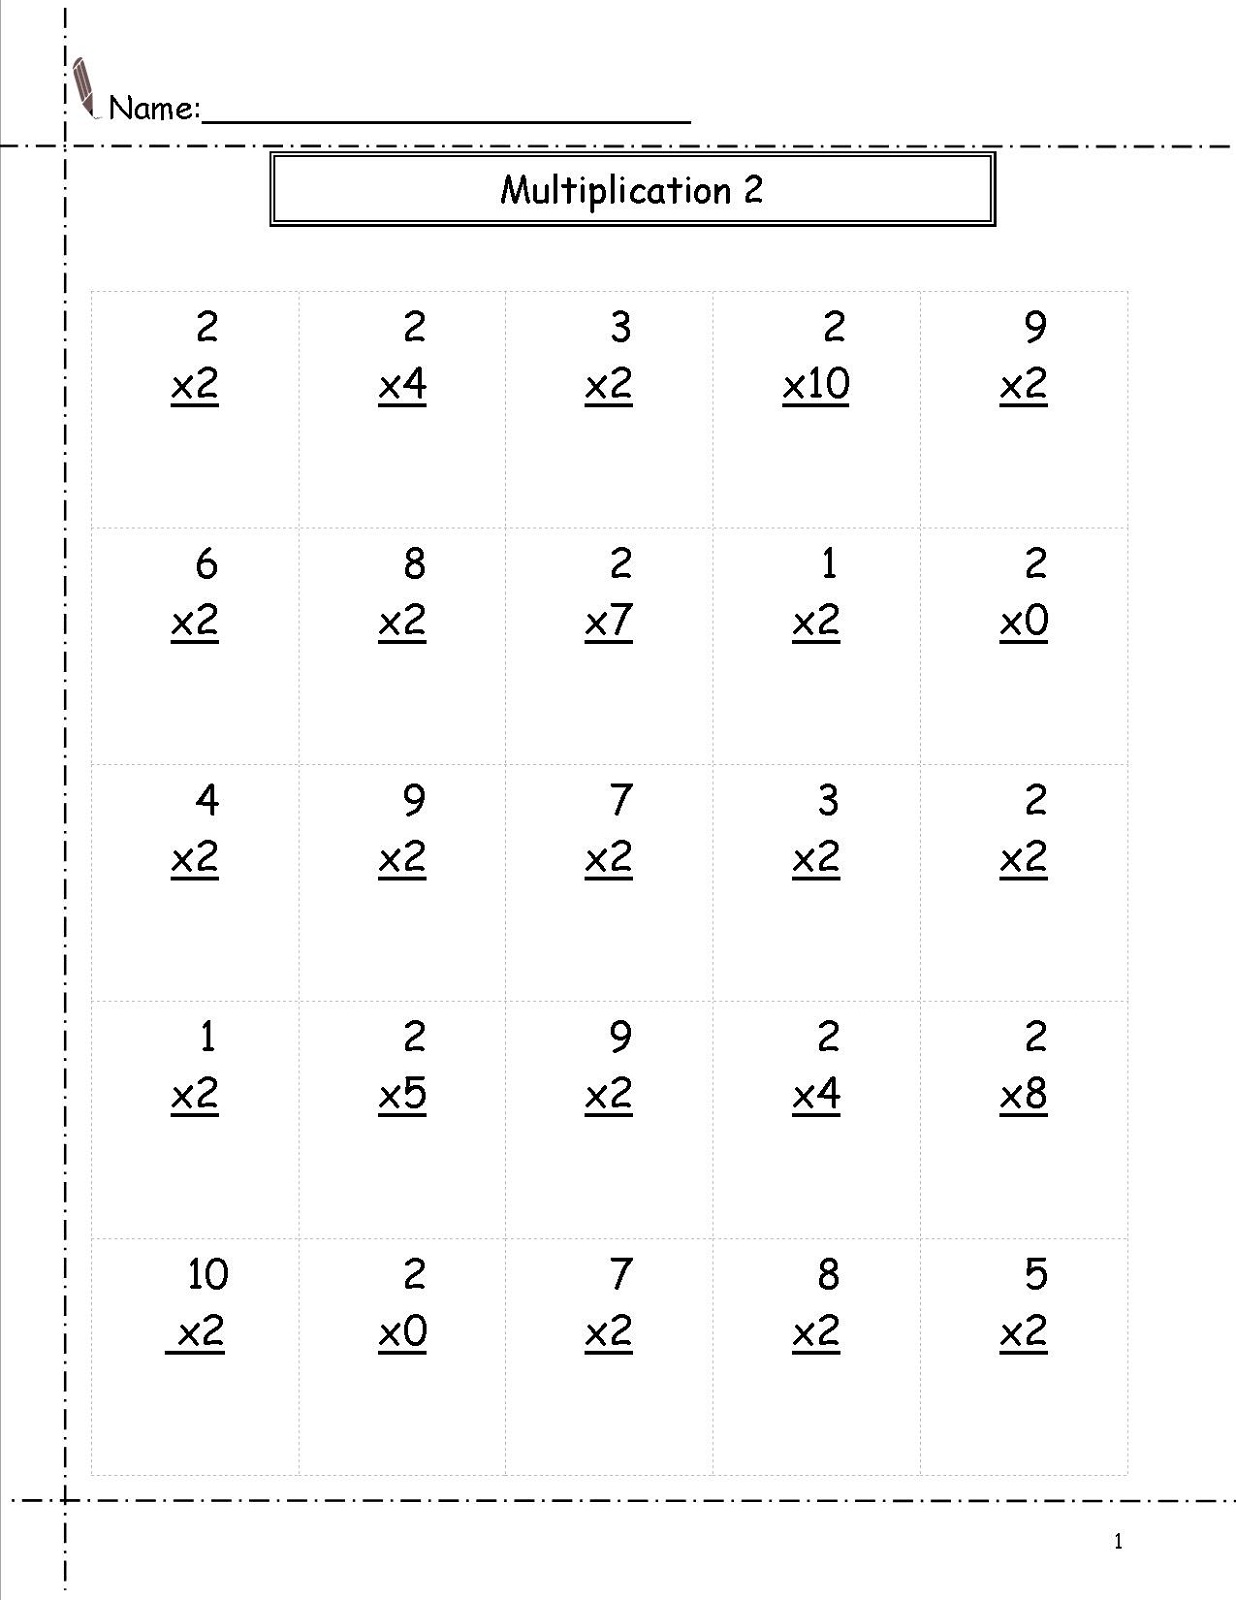 multiply-by-2-worksheets-activity-shelter